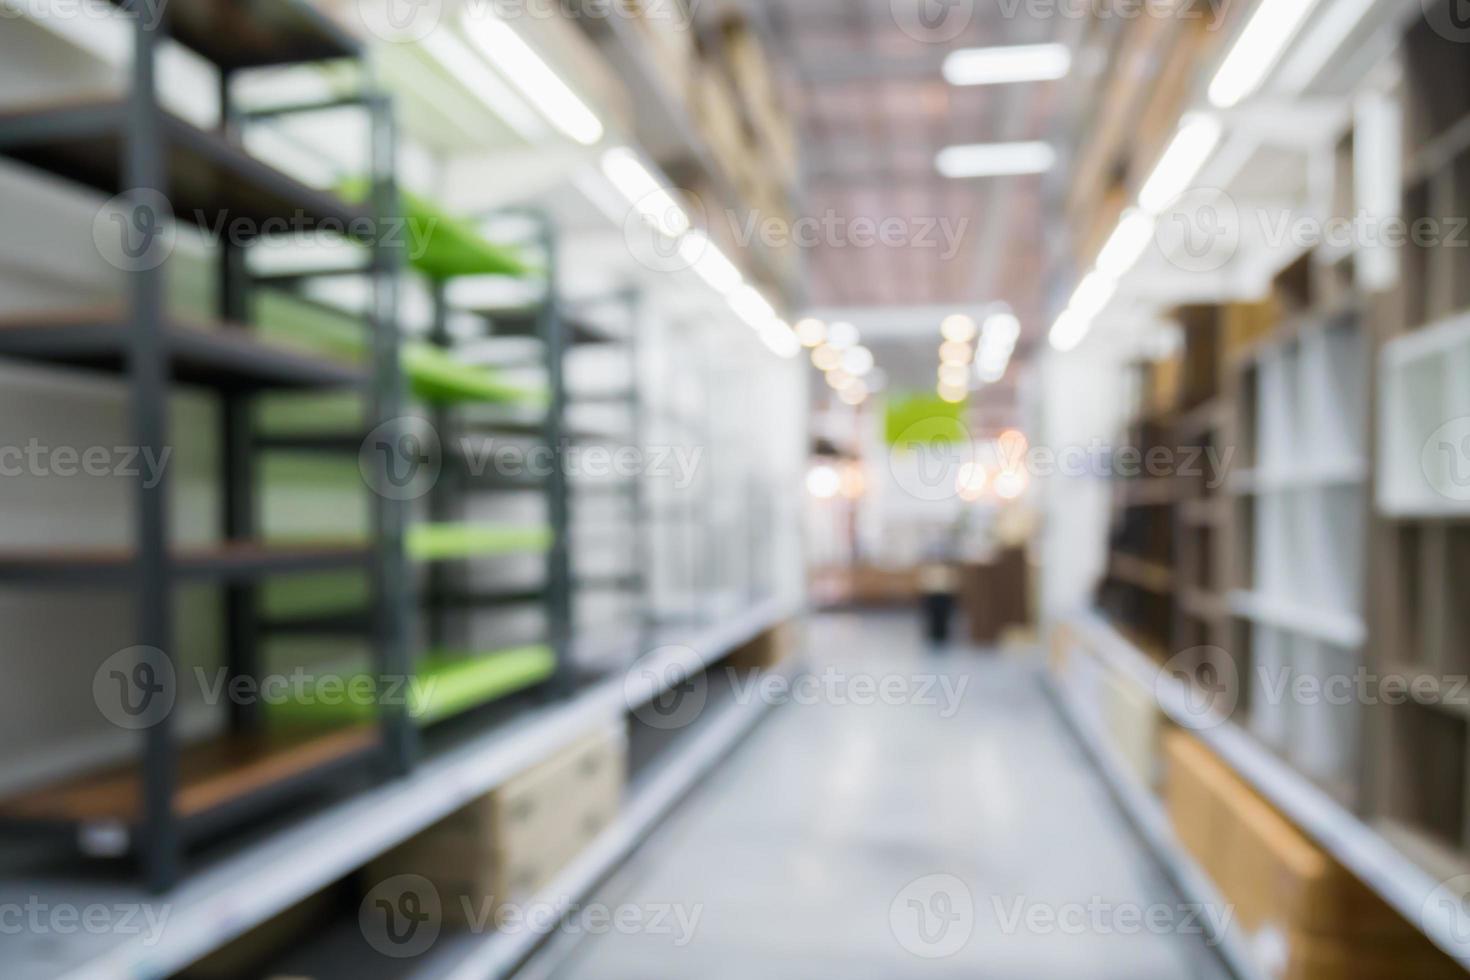 Modern home decor or supermarket department store warehouse aisle abstract blur background photo